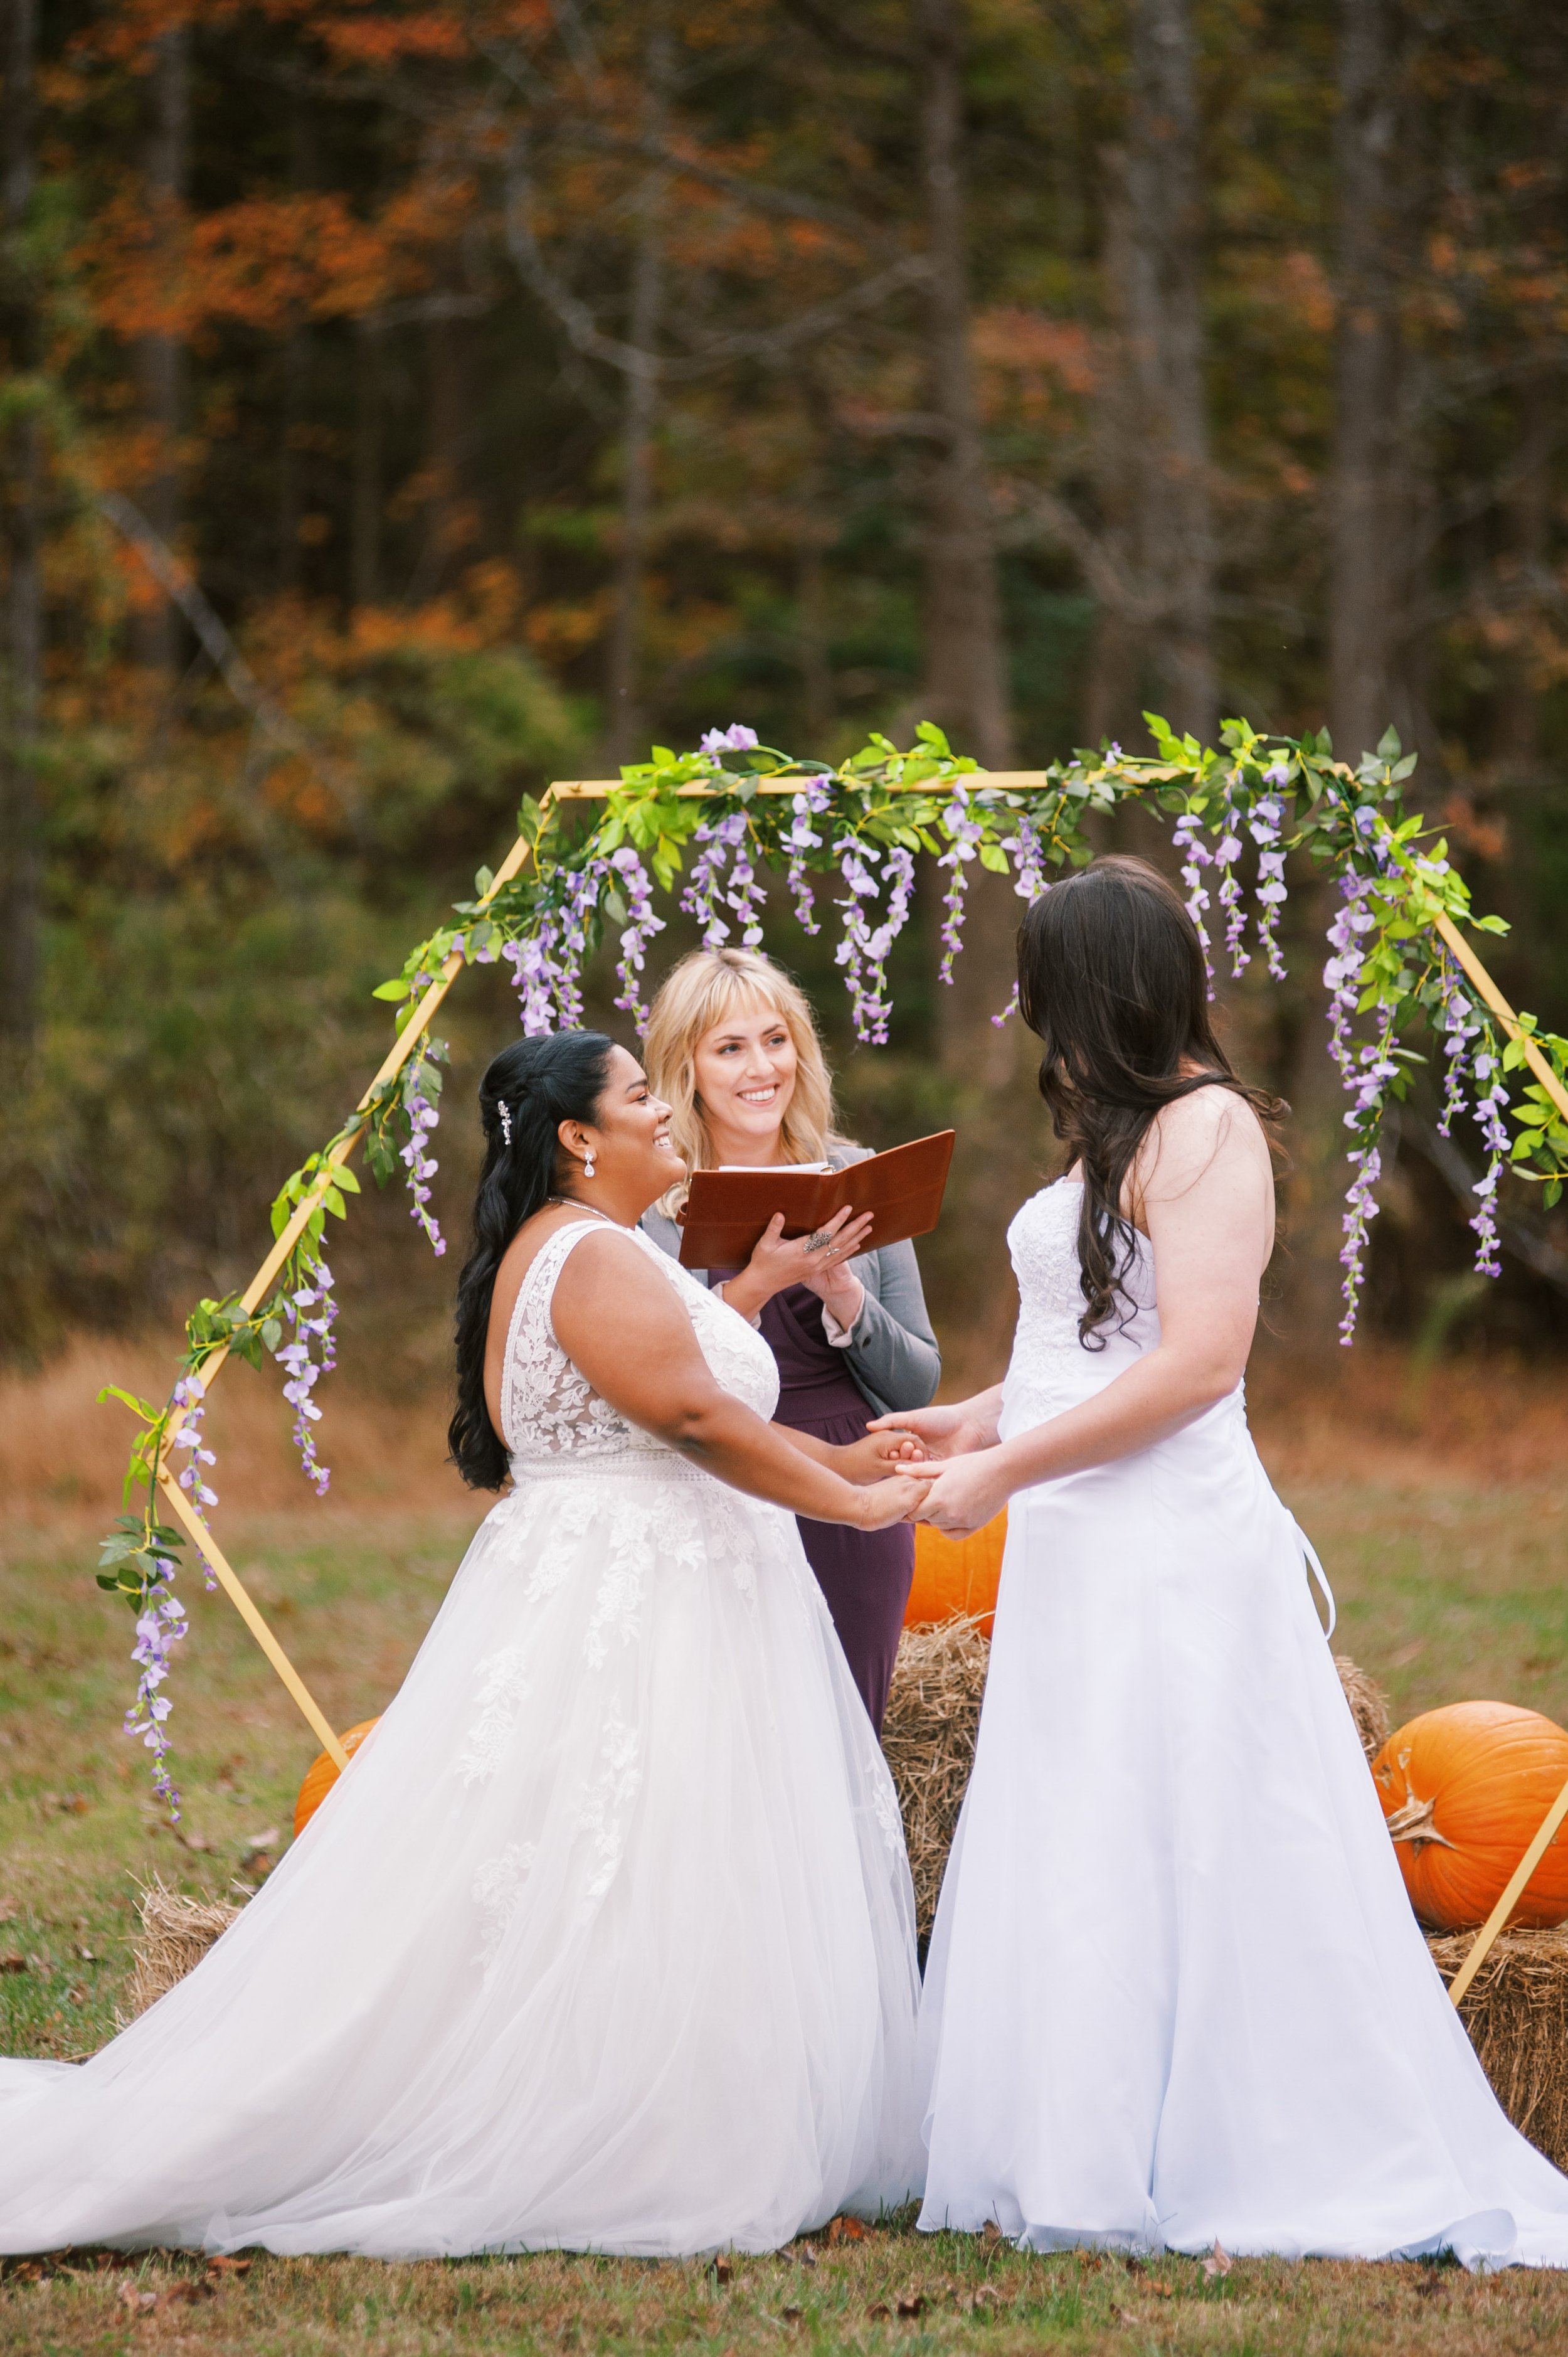 Brides and Rev Dupree at Beautiful Mebane NC Wedding in Family's Backyard Fancy This Photography